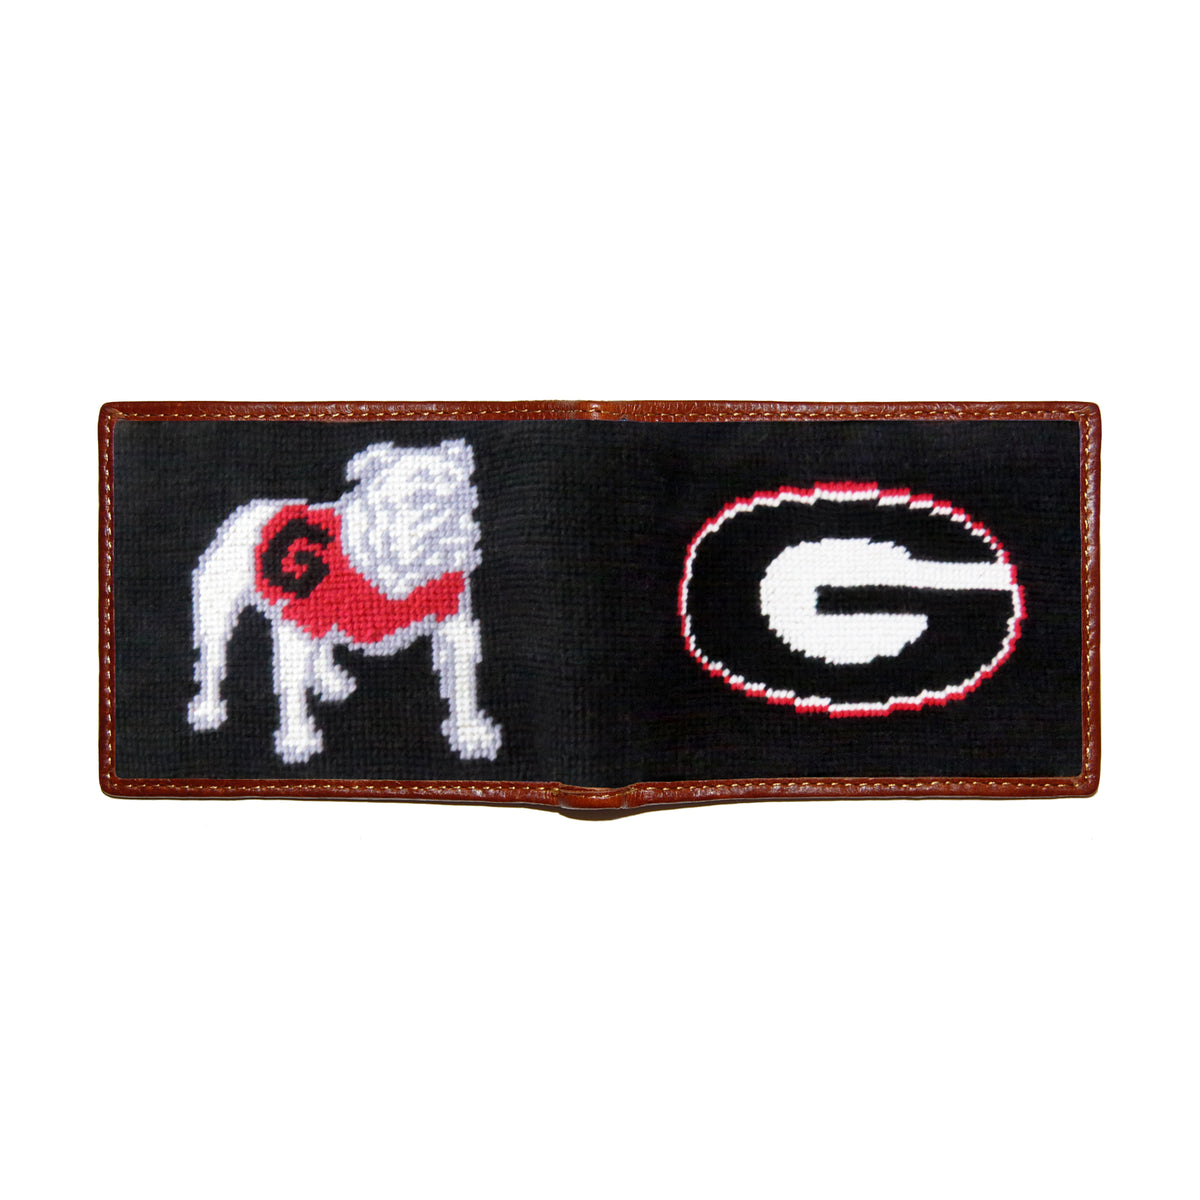 Georgia Needlepoint Wallet in Black by Smathers & Branson - Country Club Prep